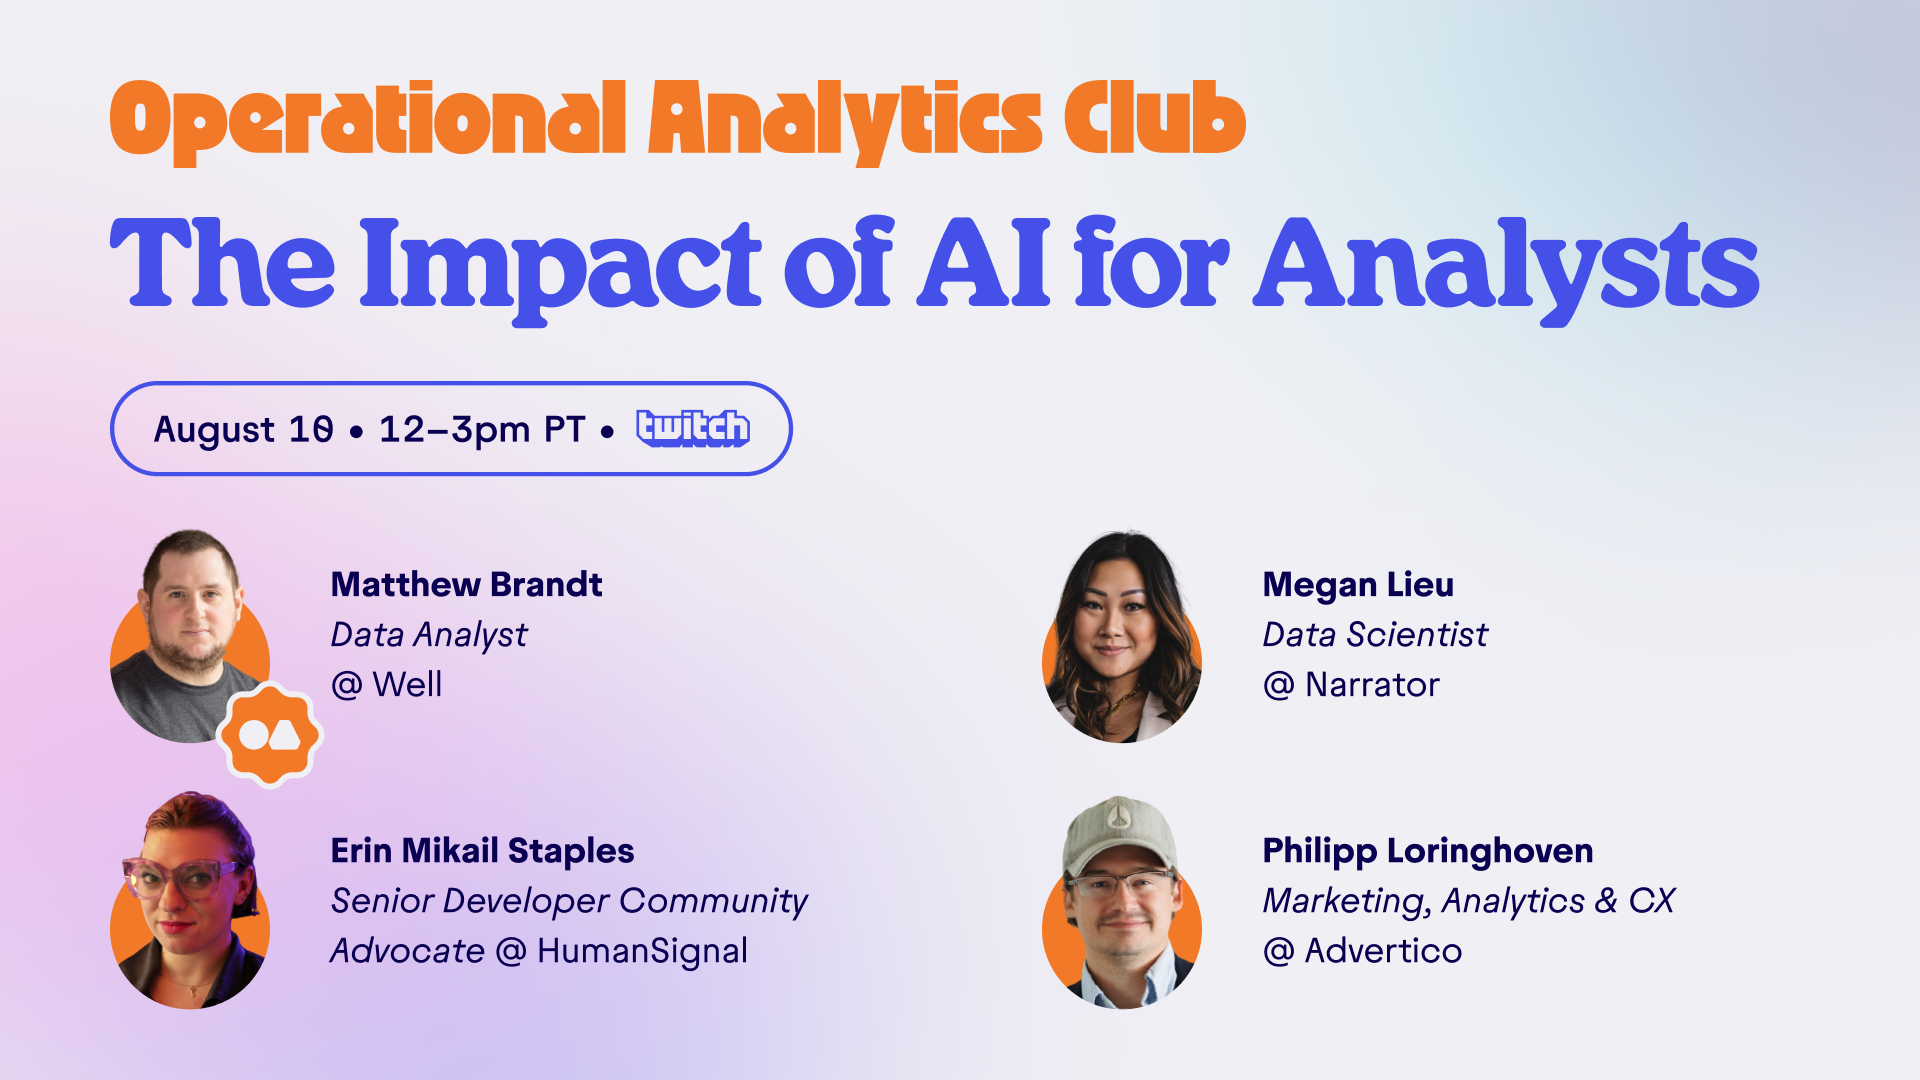 [Twitch Stream] AI for Analysts: Deep Impact or Hot Air?